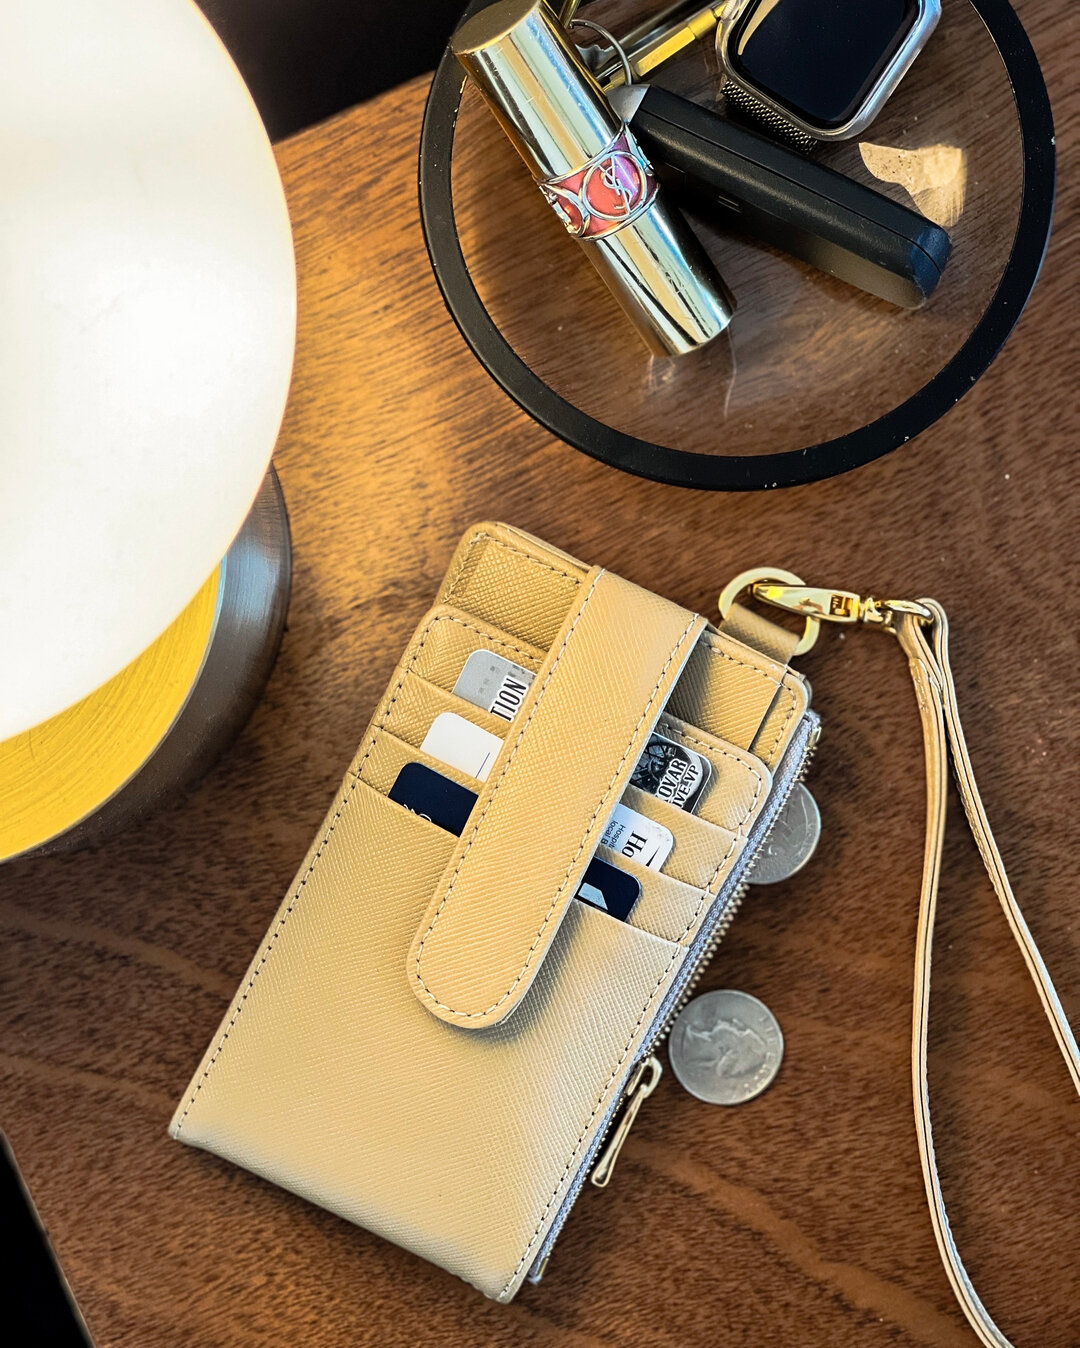 Change? AirTag? Odd shaped business cards? Why did they think we didn't need a coin pouch? Carry your shield and daily necessities in the only modern badge wallet for women.